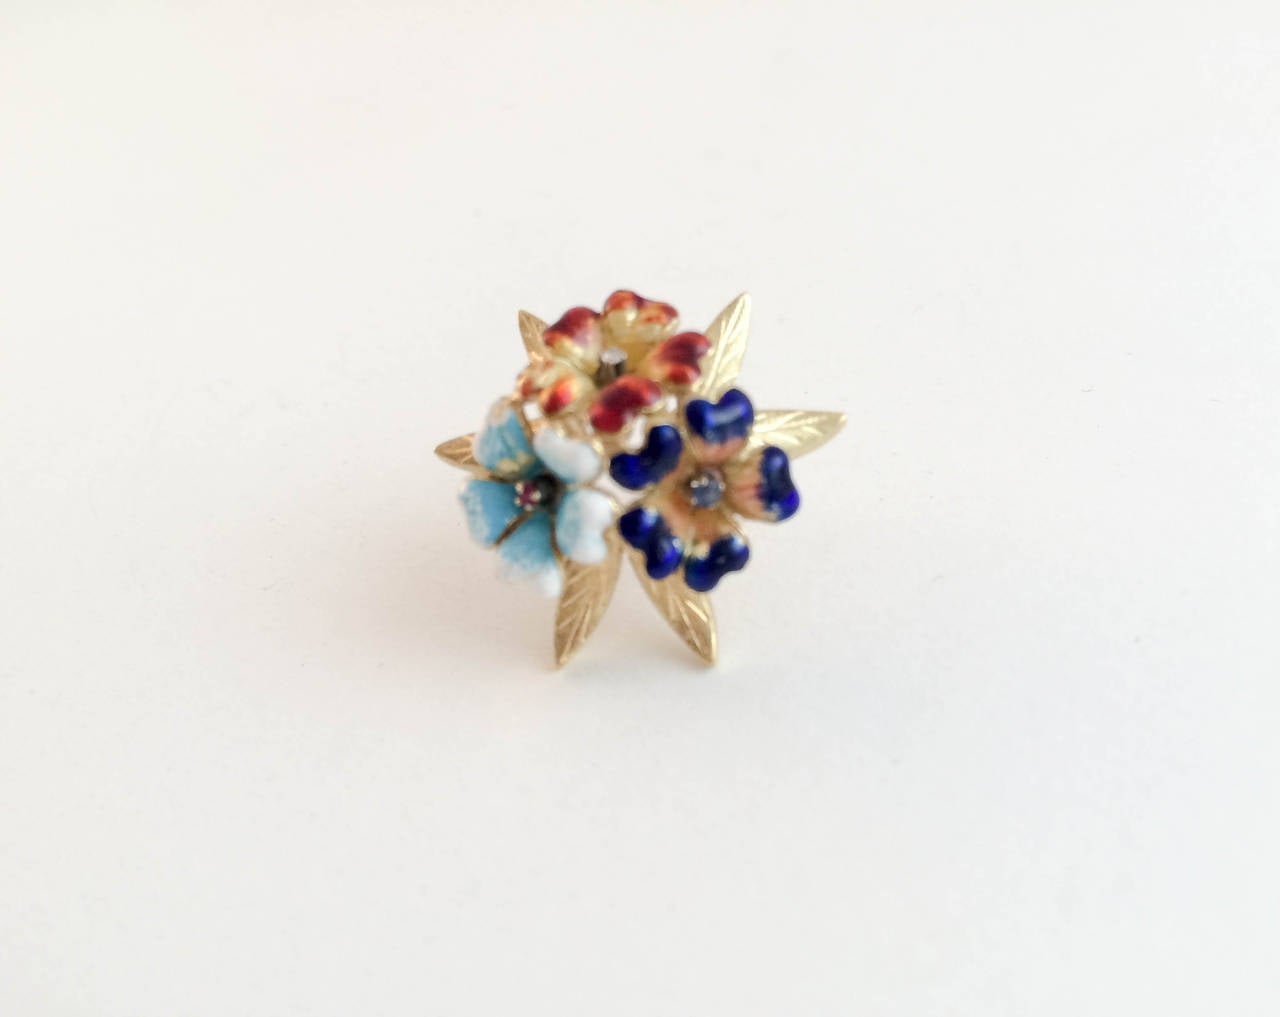 Gold, Enamel and Diamonds Set - 1980s In New Condition For Sale In London, Chelsea